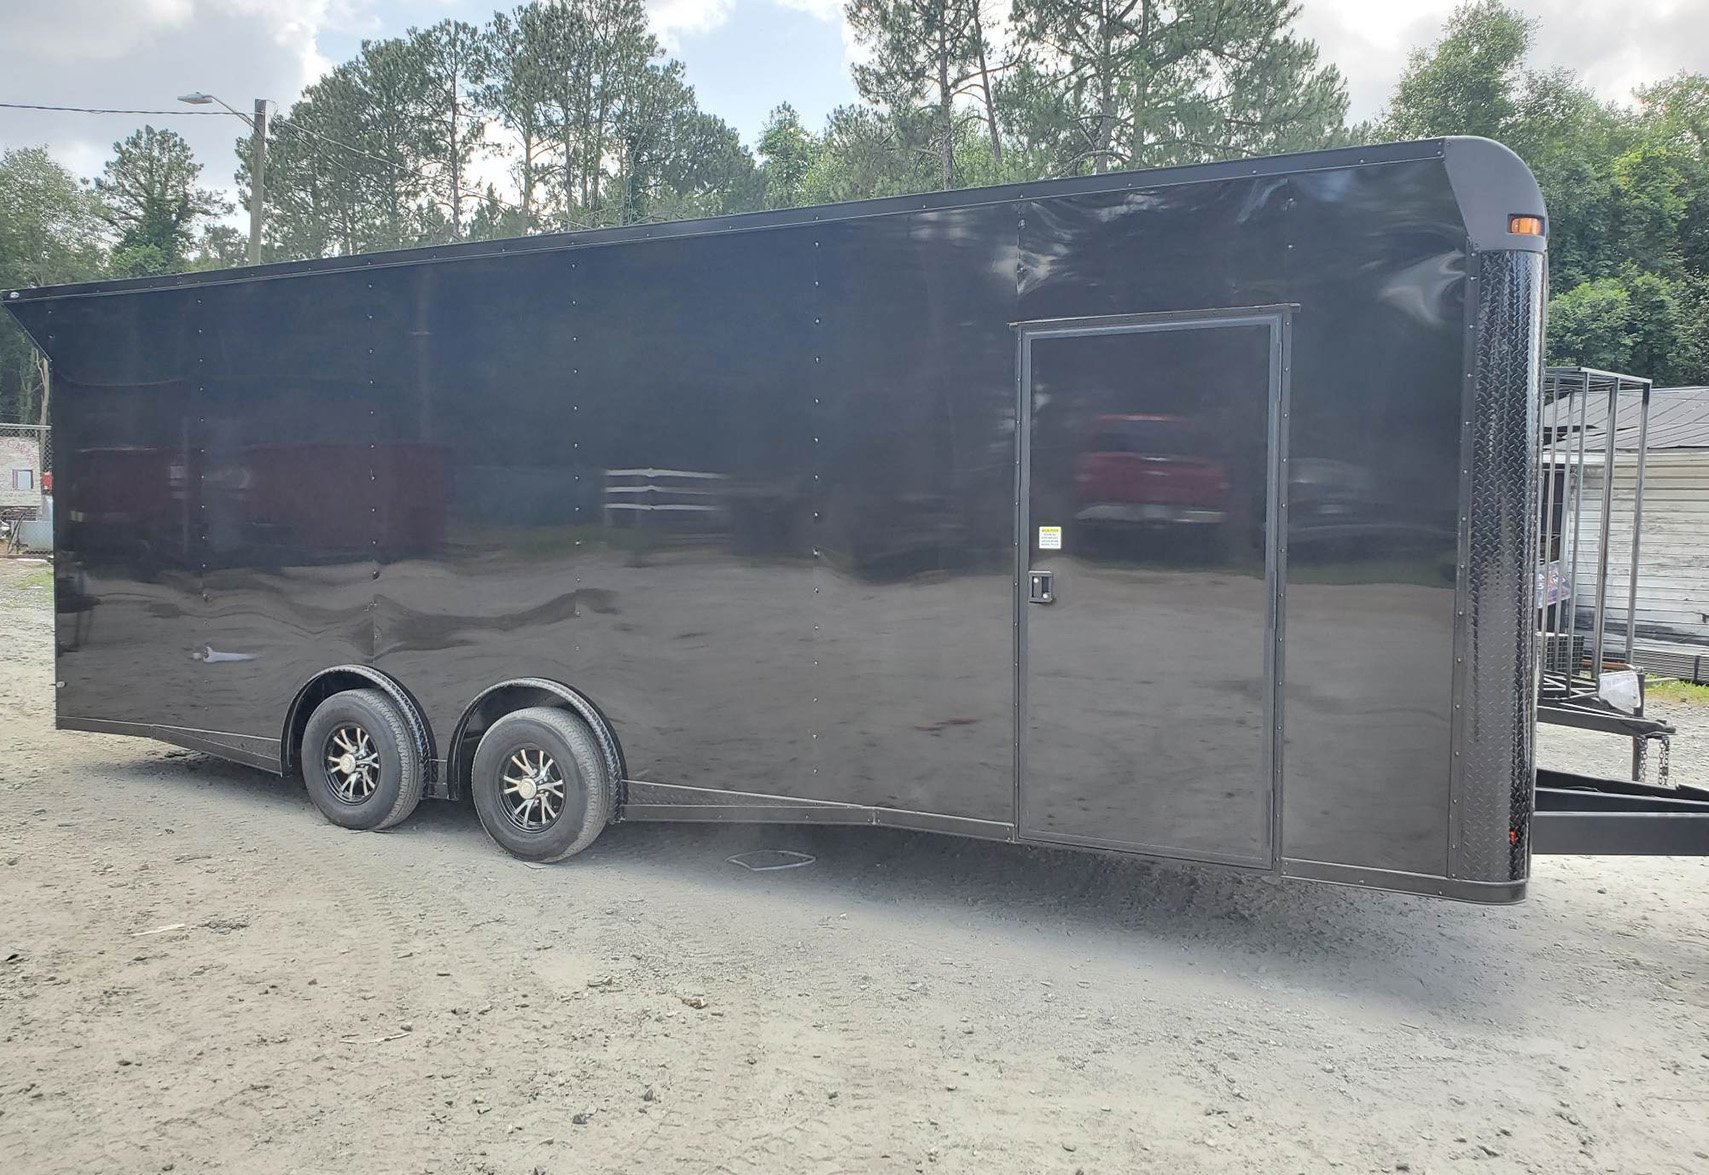 Black enclosed trailer with a flat bed and wheels, parked on a gravel surface.